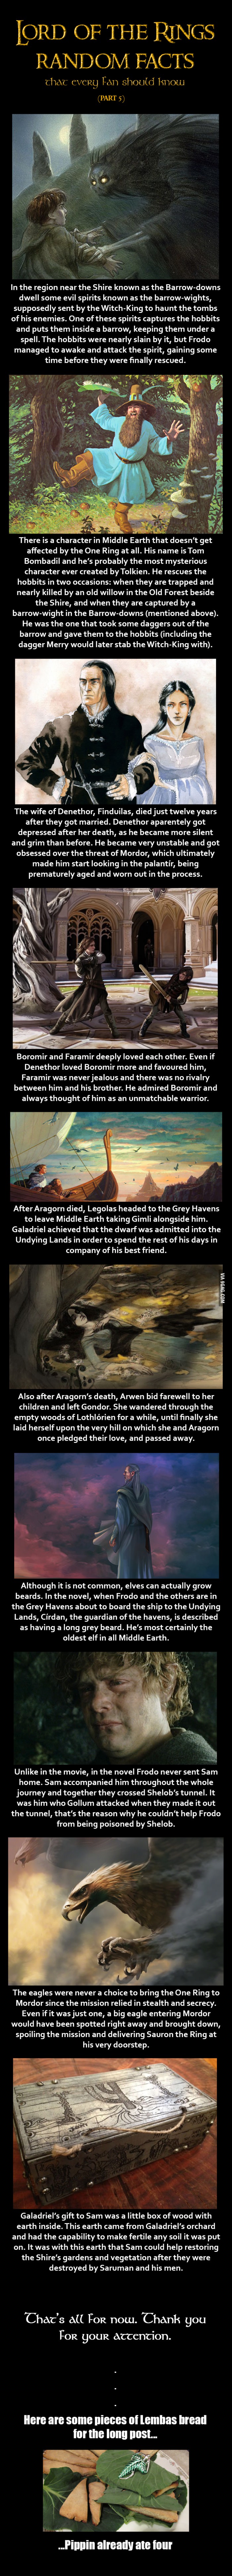 Lord of the Rings Random Facts Part 5